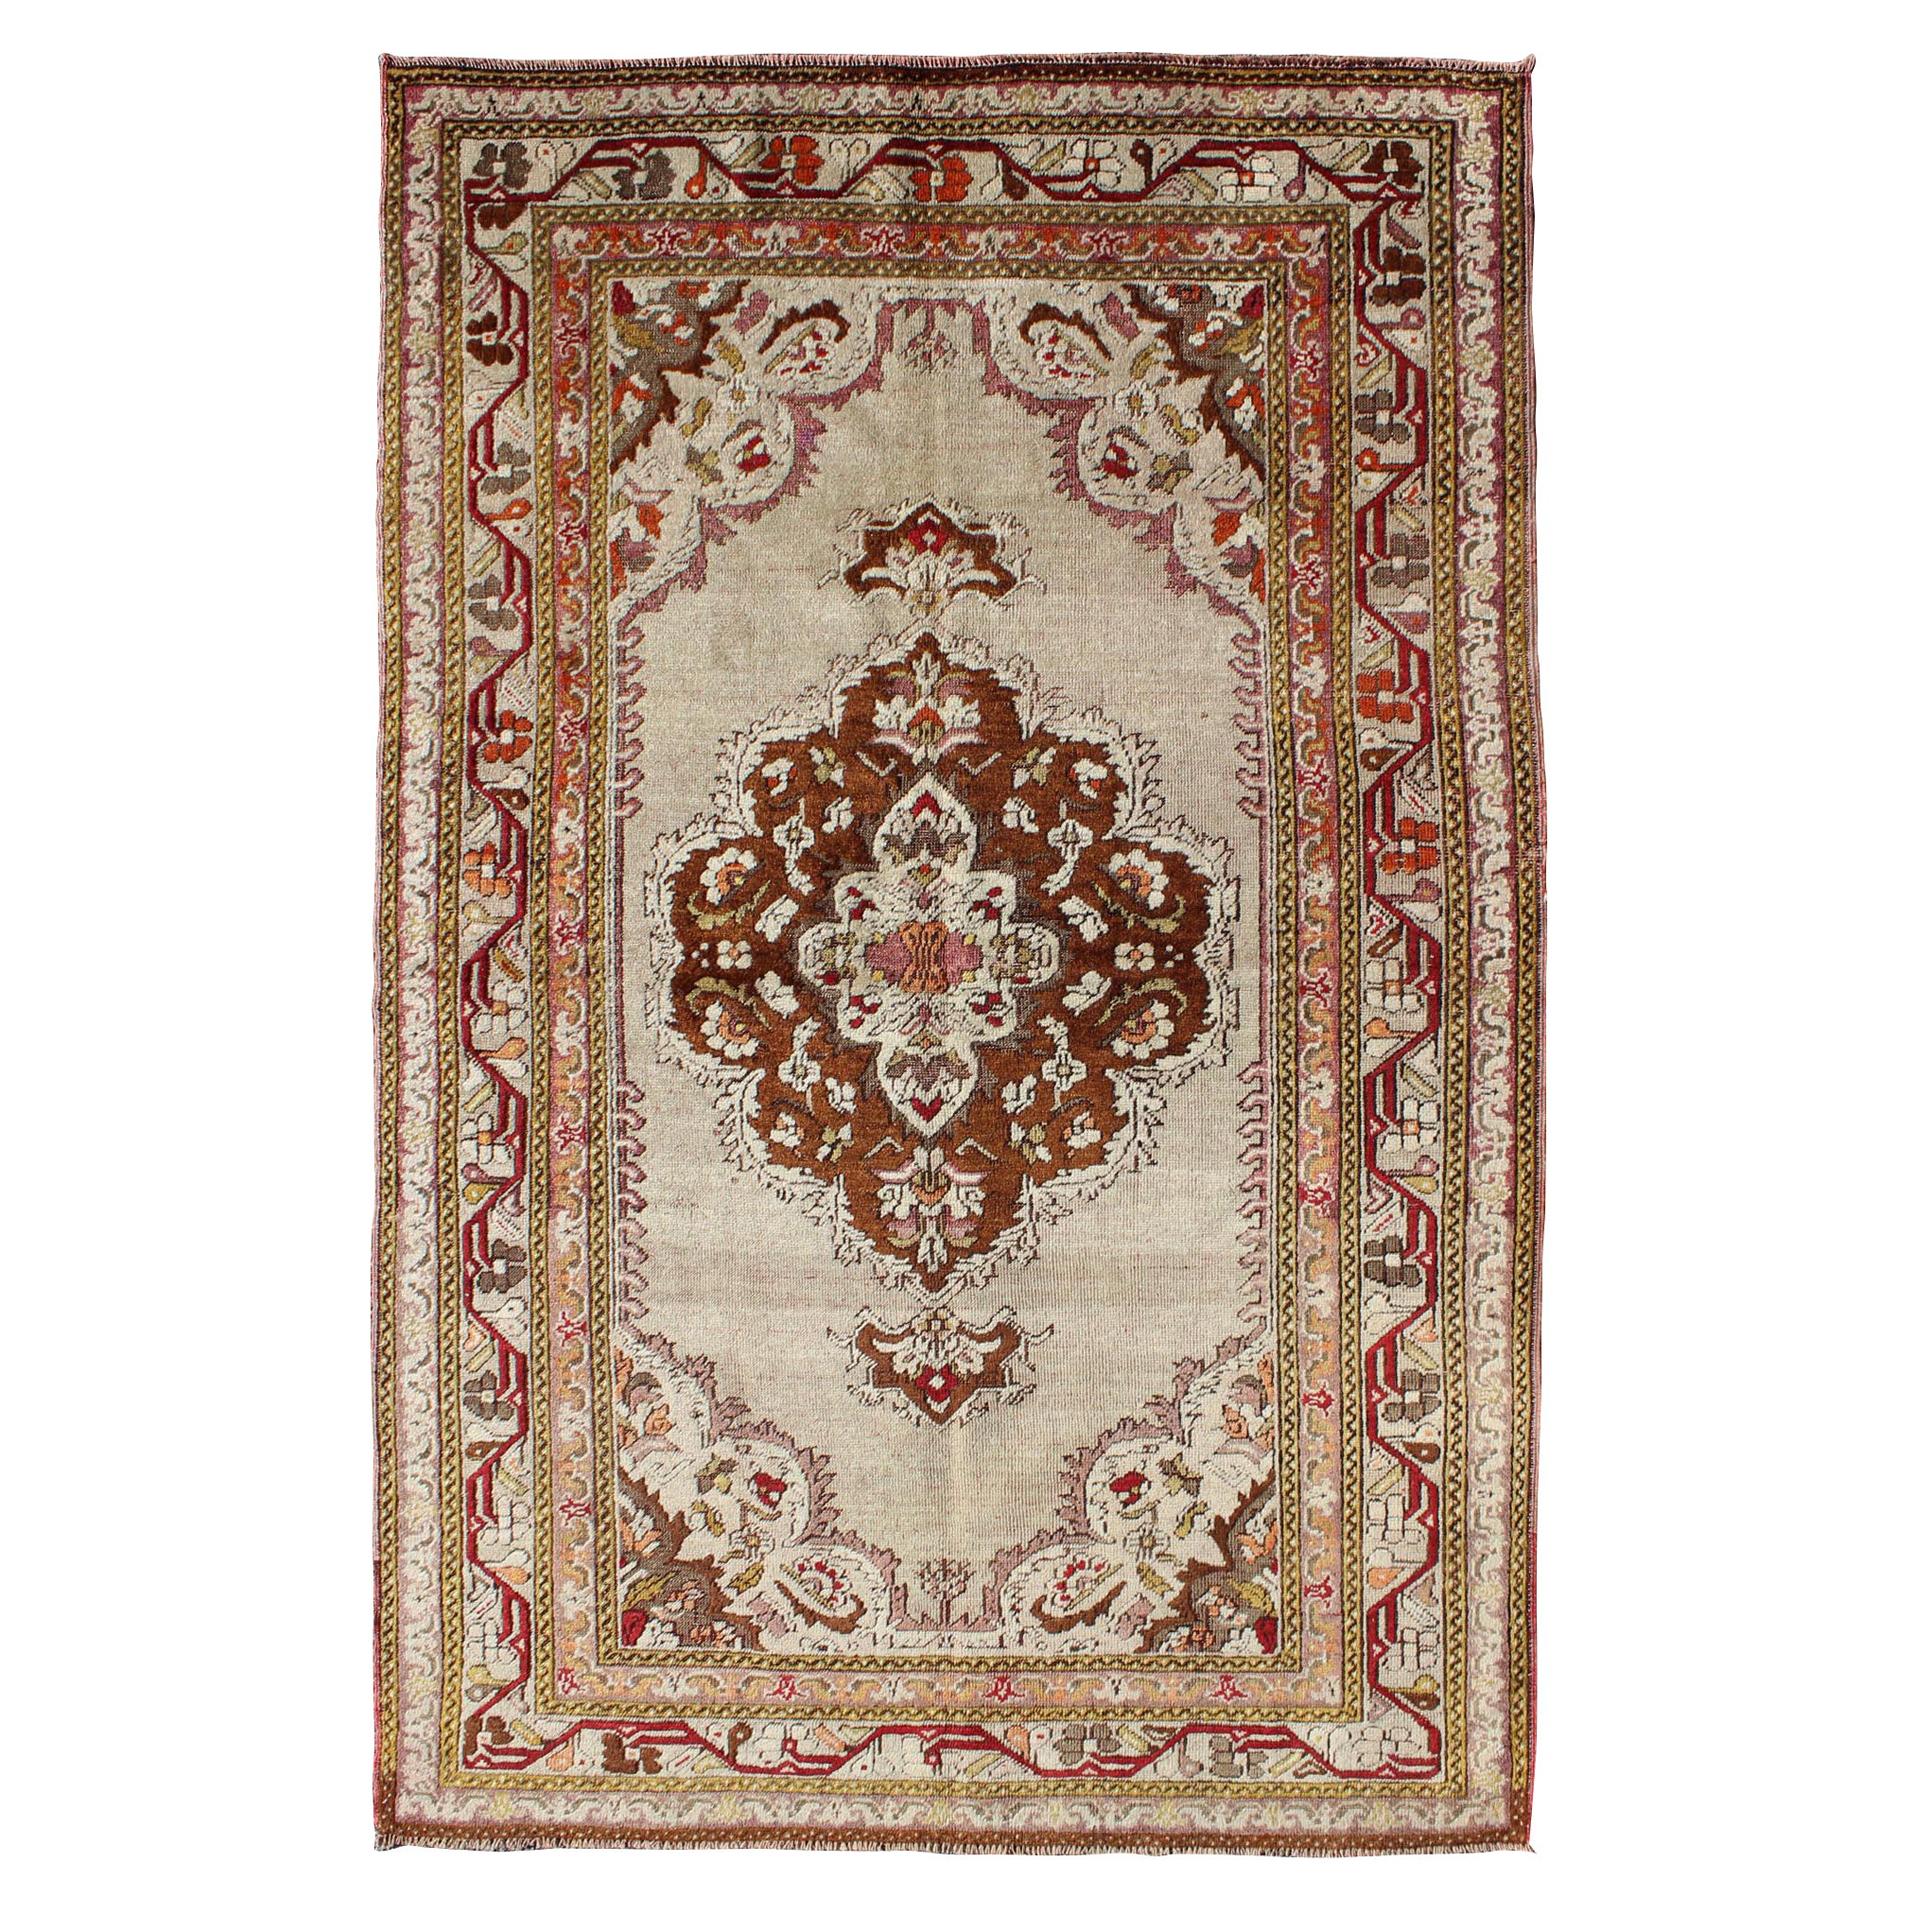 Classic Design, Intricate Antique Oushak with Fine Weave & Great Quality Wool For Sale